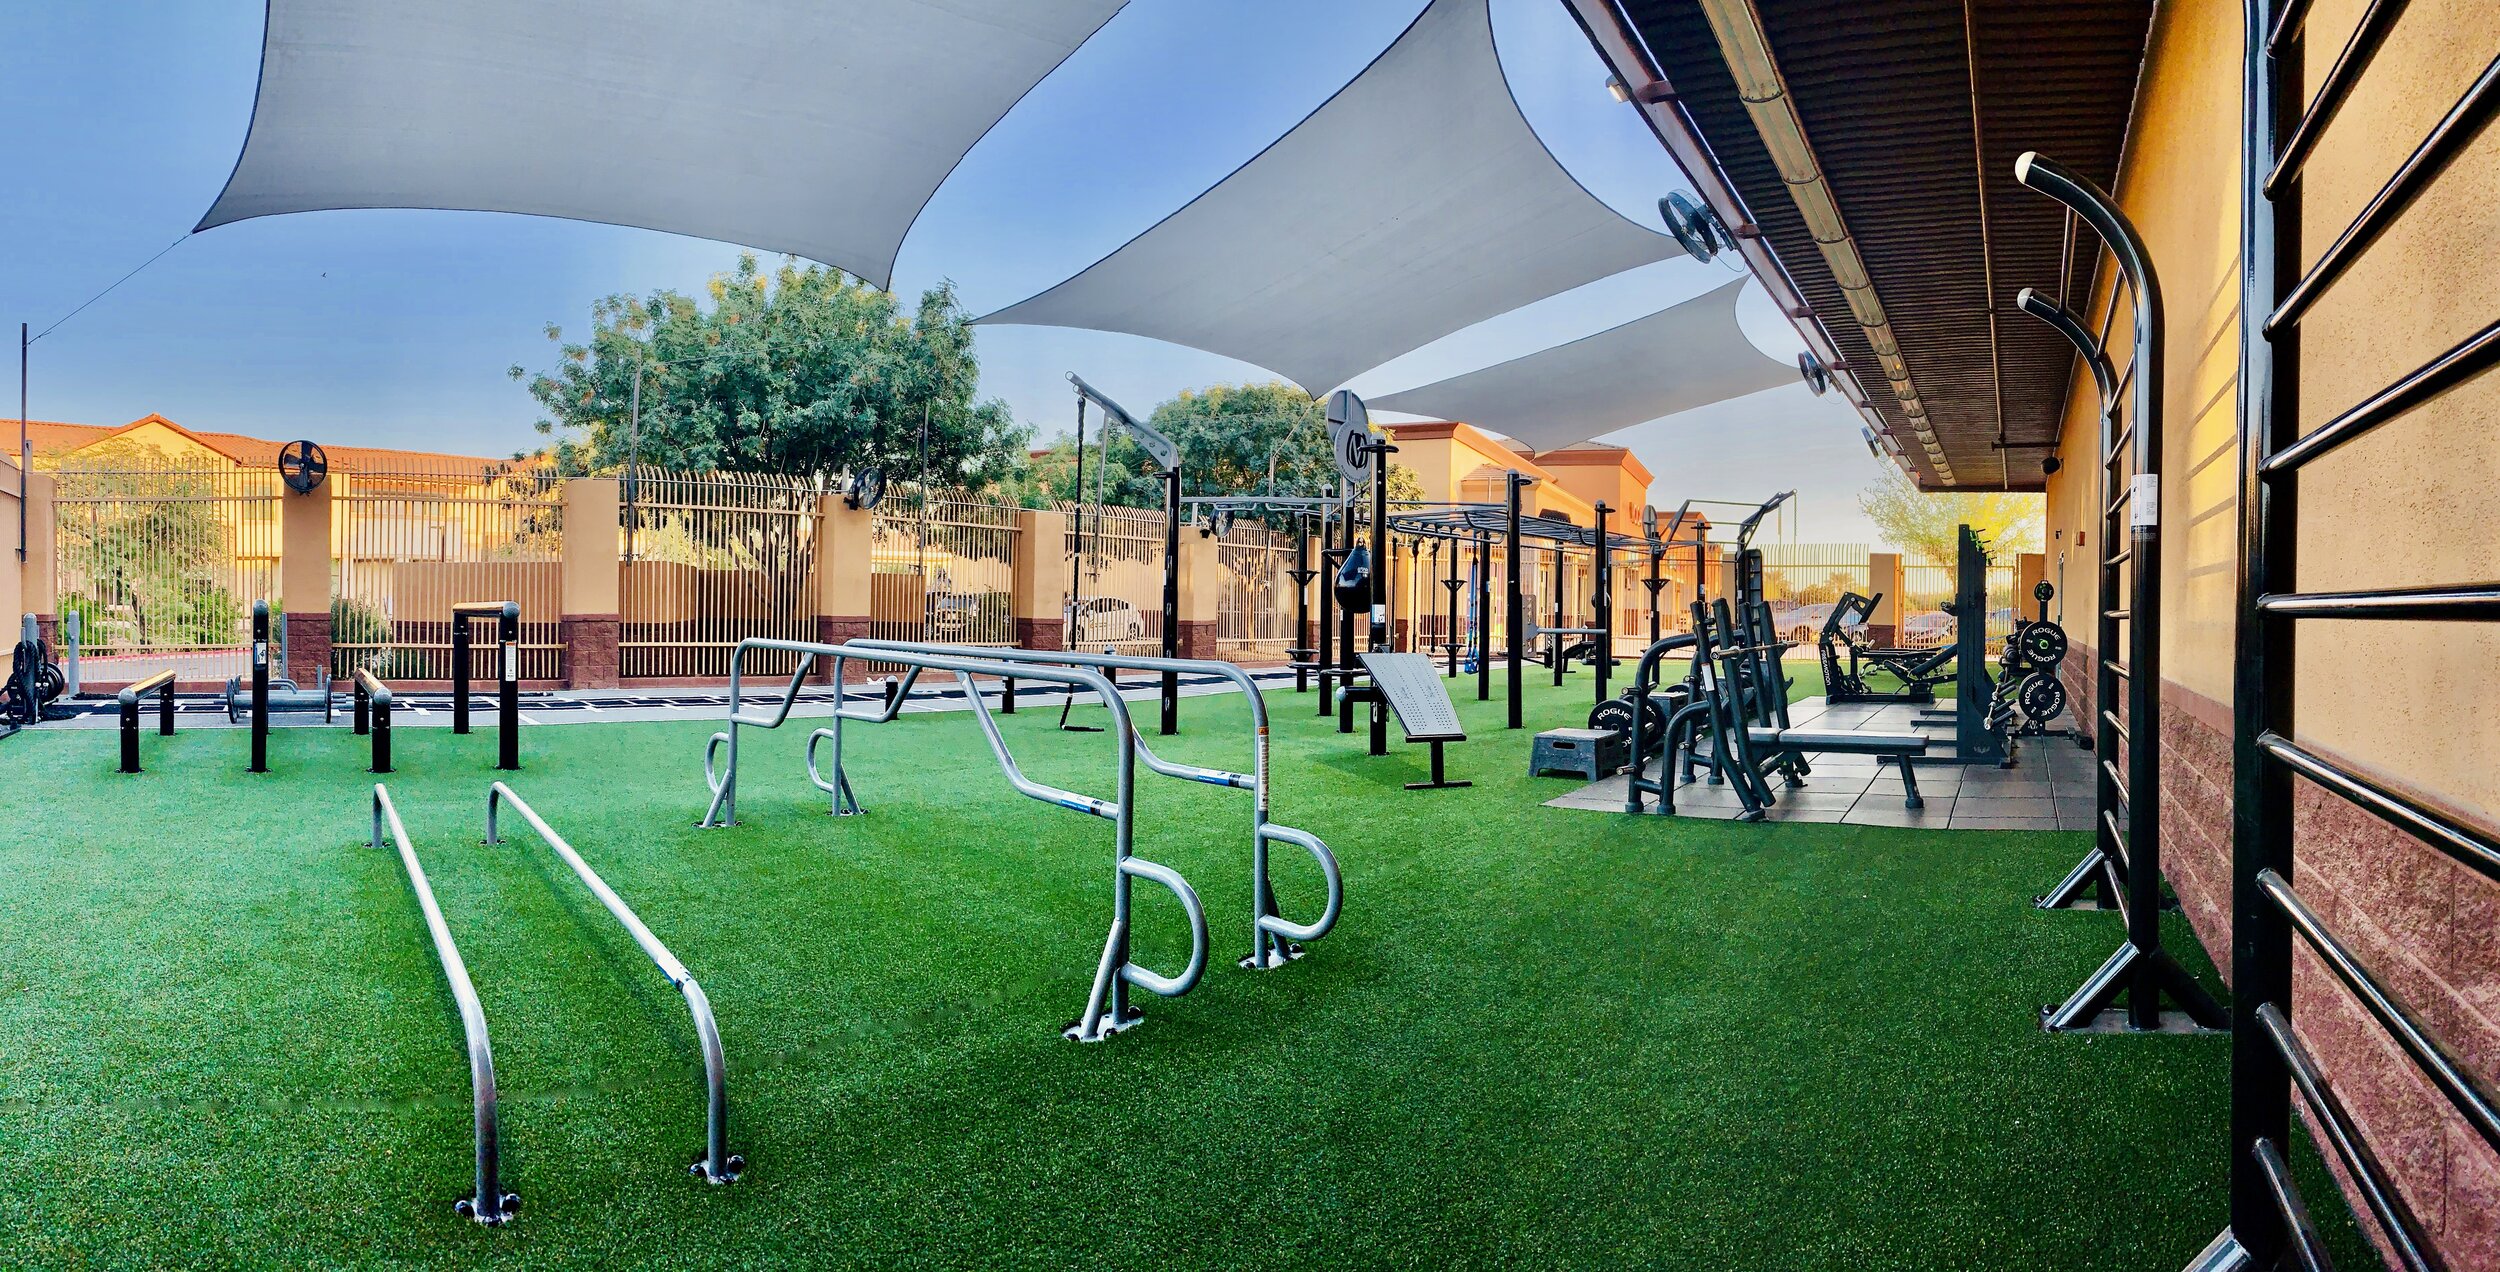 New Fitness Franchise Launches Outdoor Training Gym Space - MoveStrong